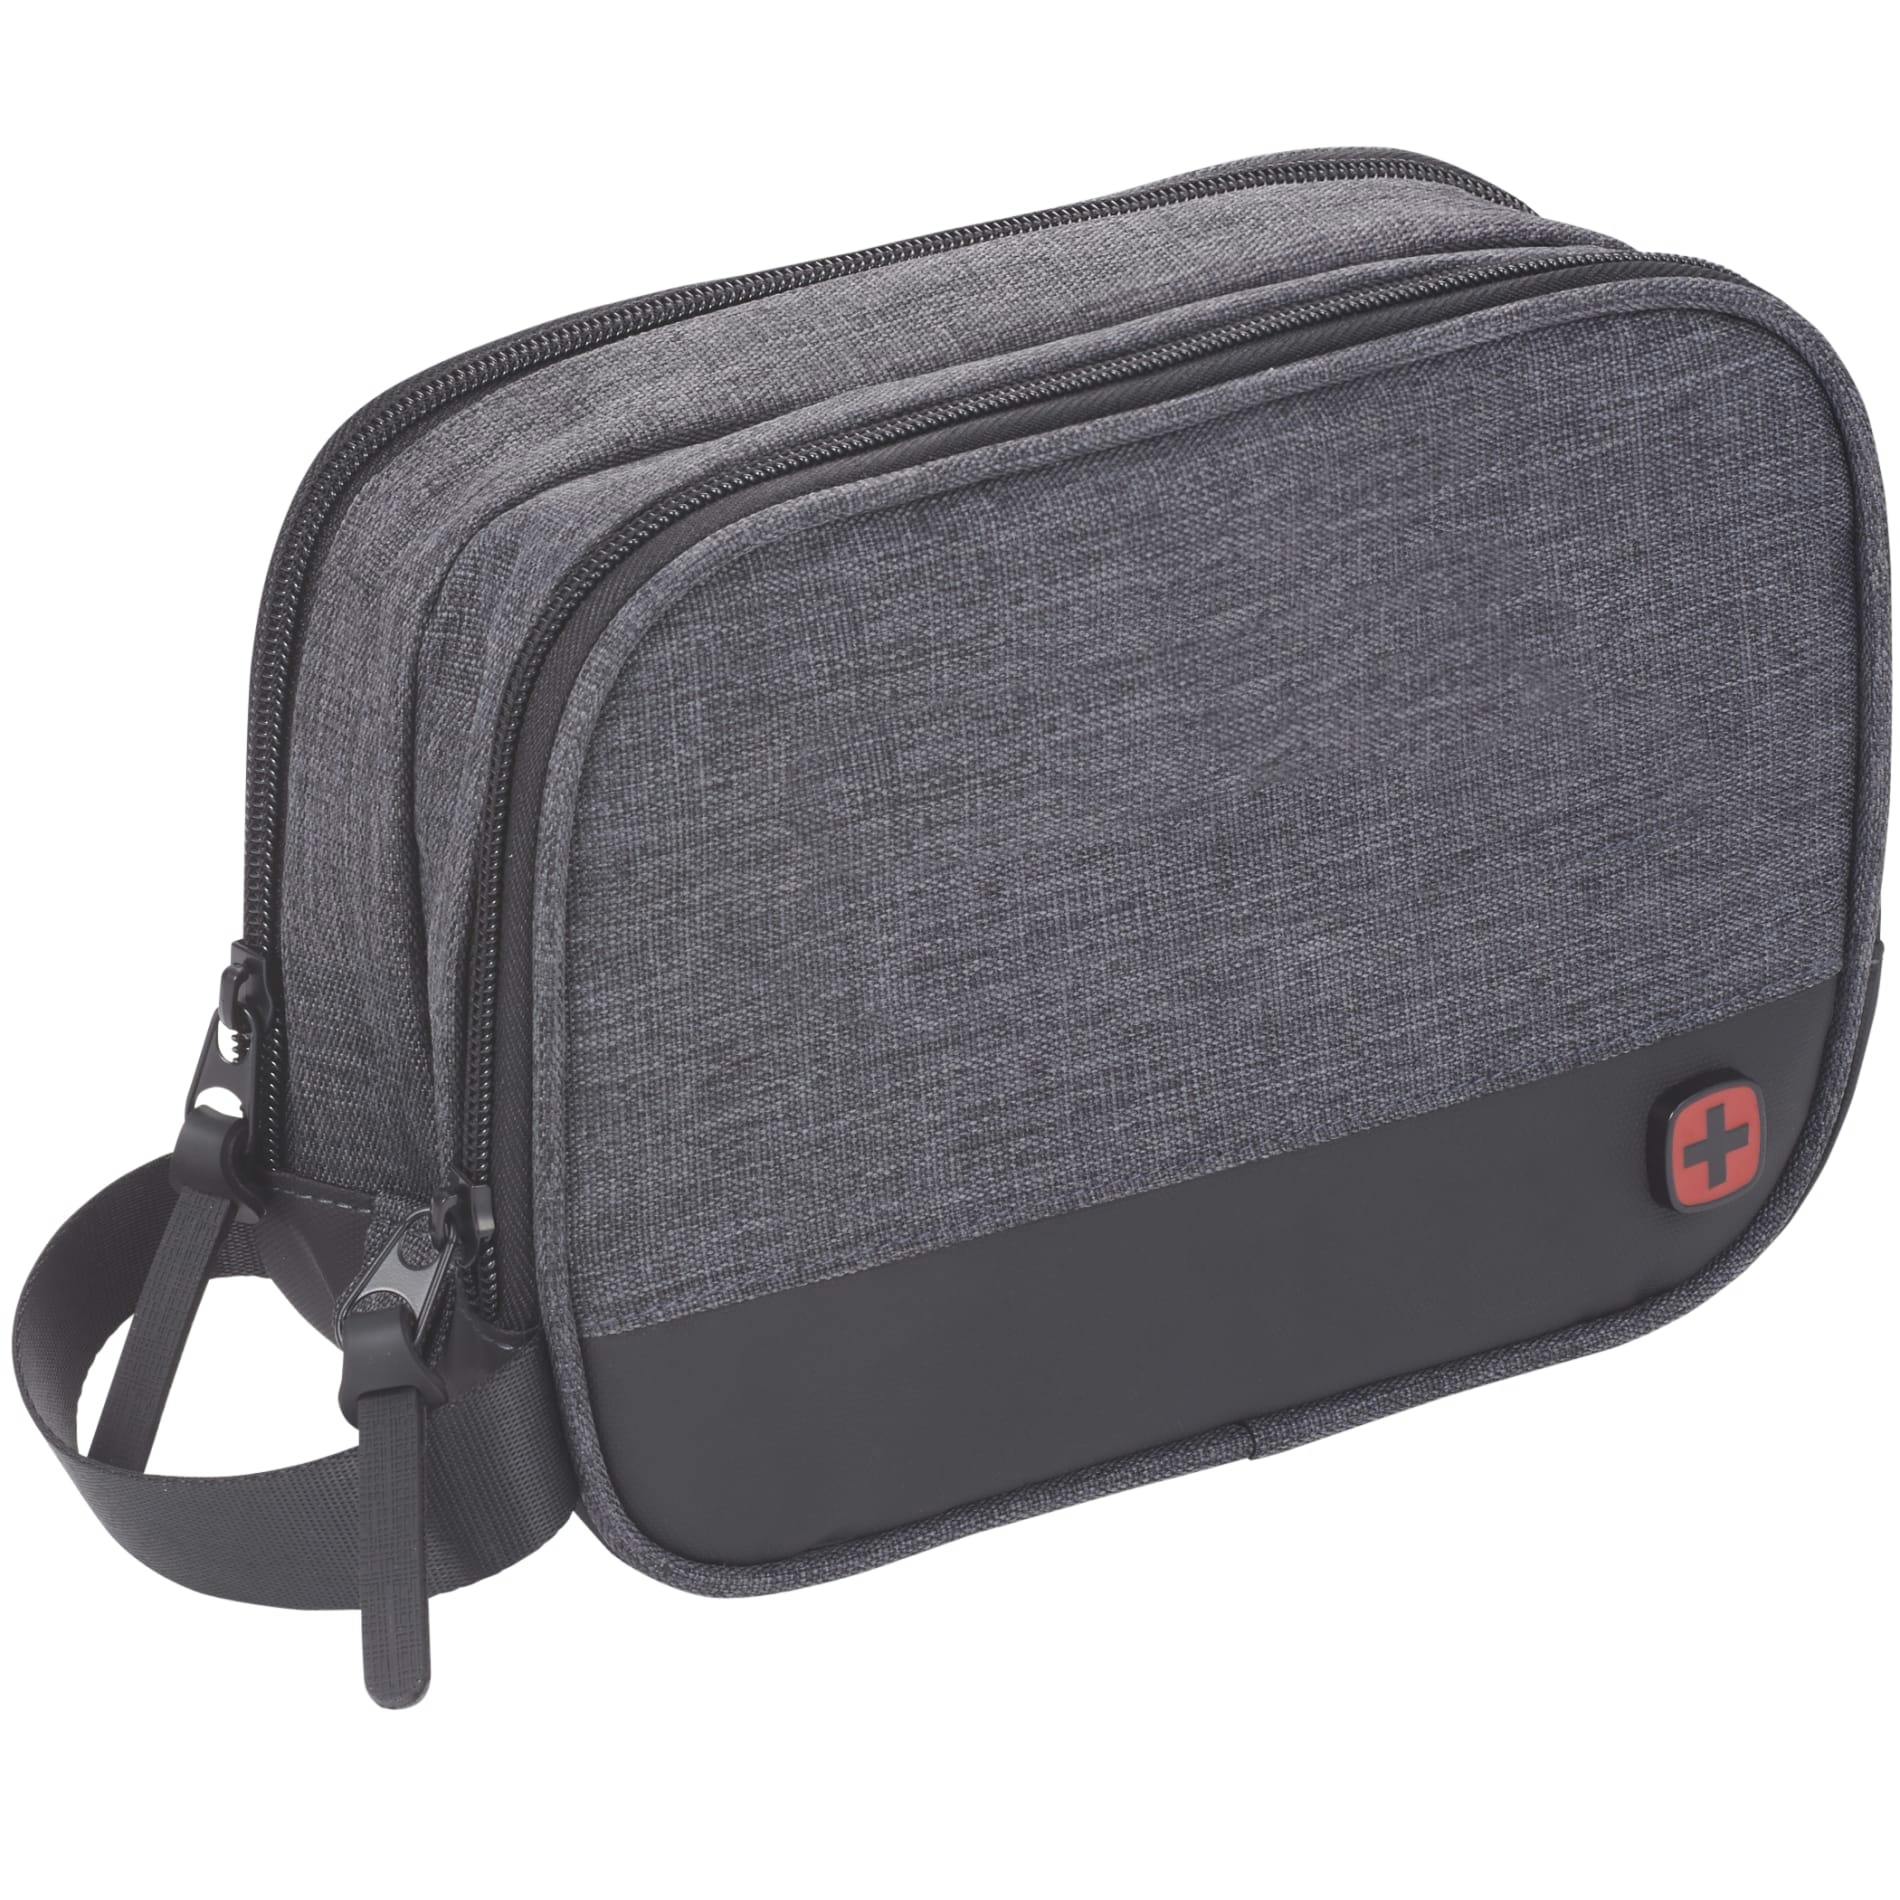 Wenger RPET Dual Compartment Dopp Kit - additional Image 3